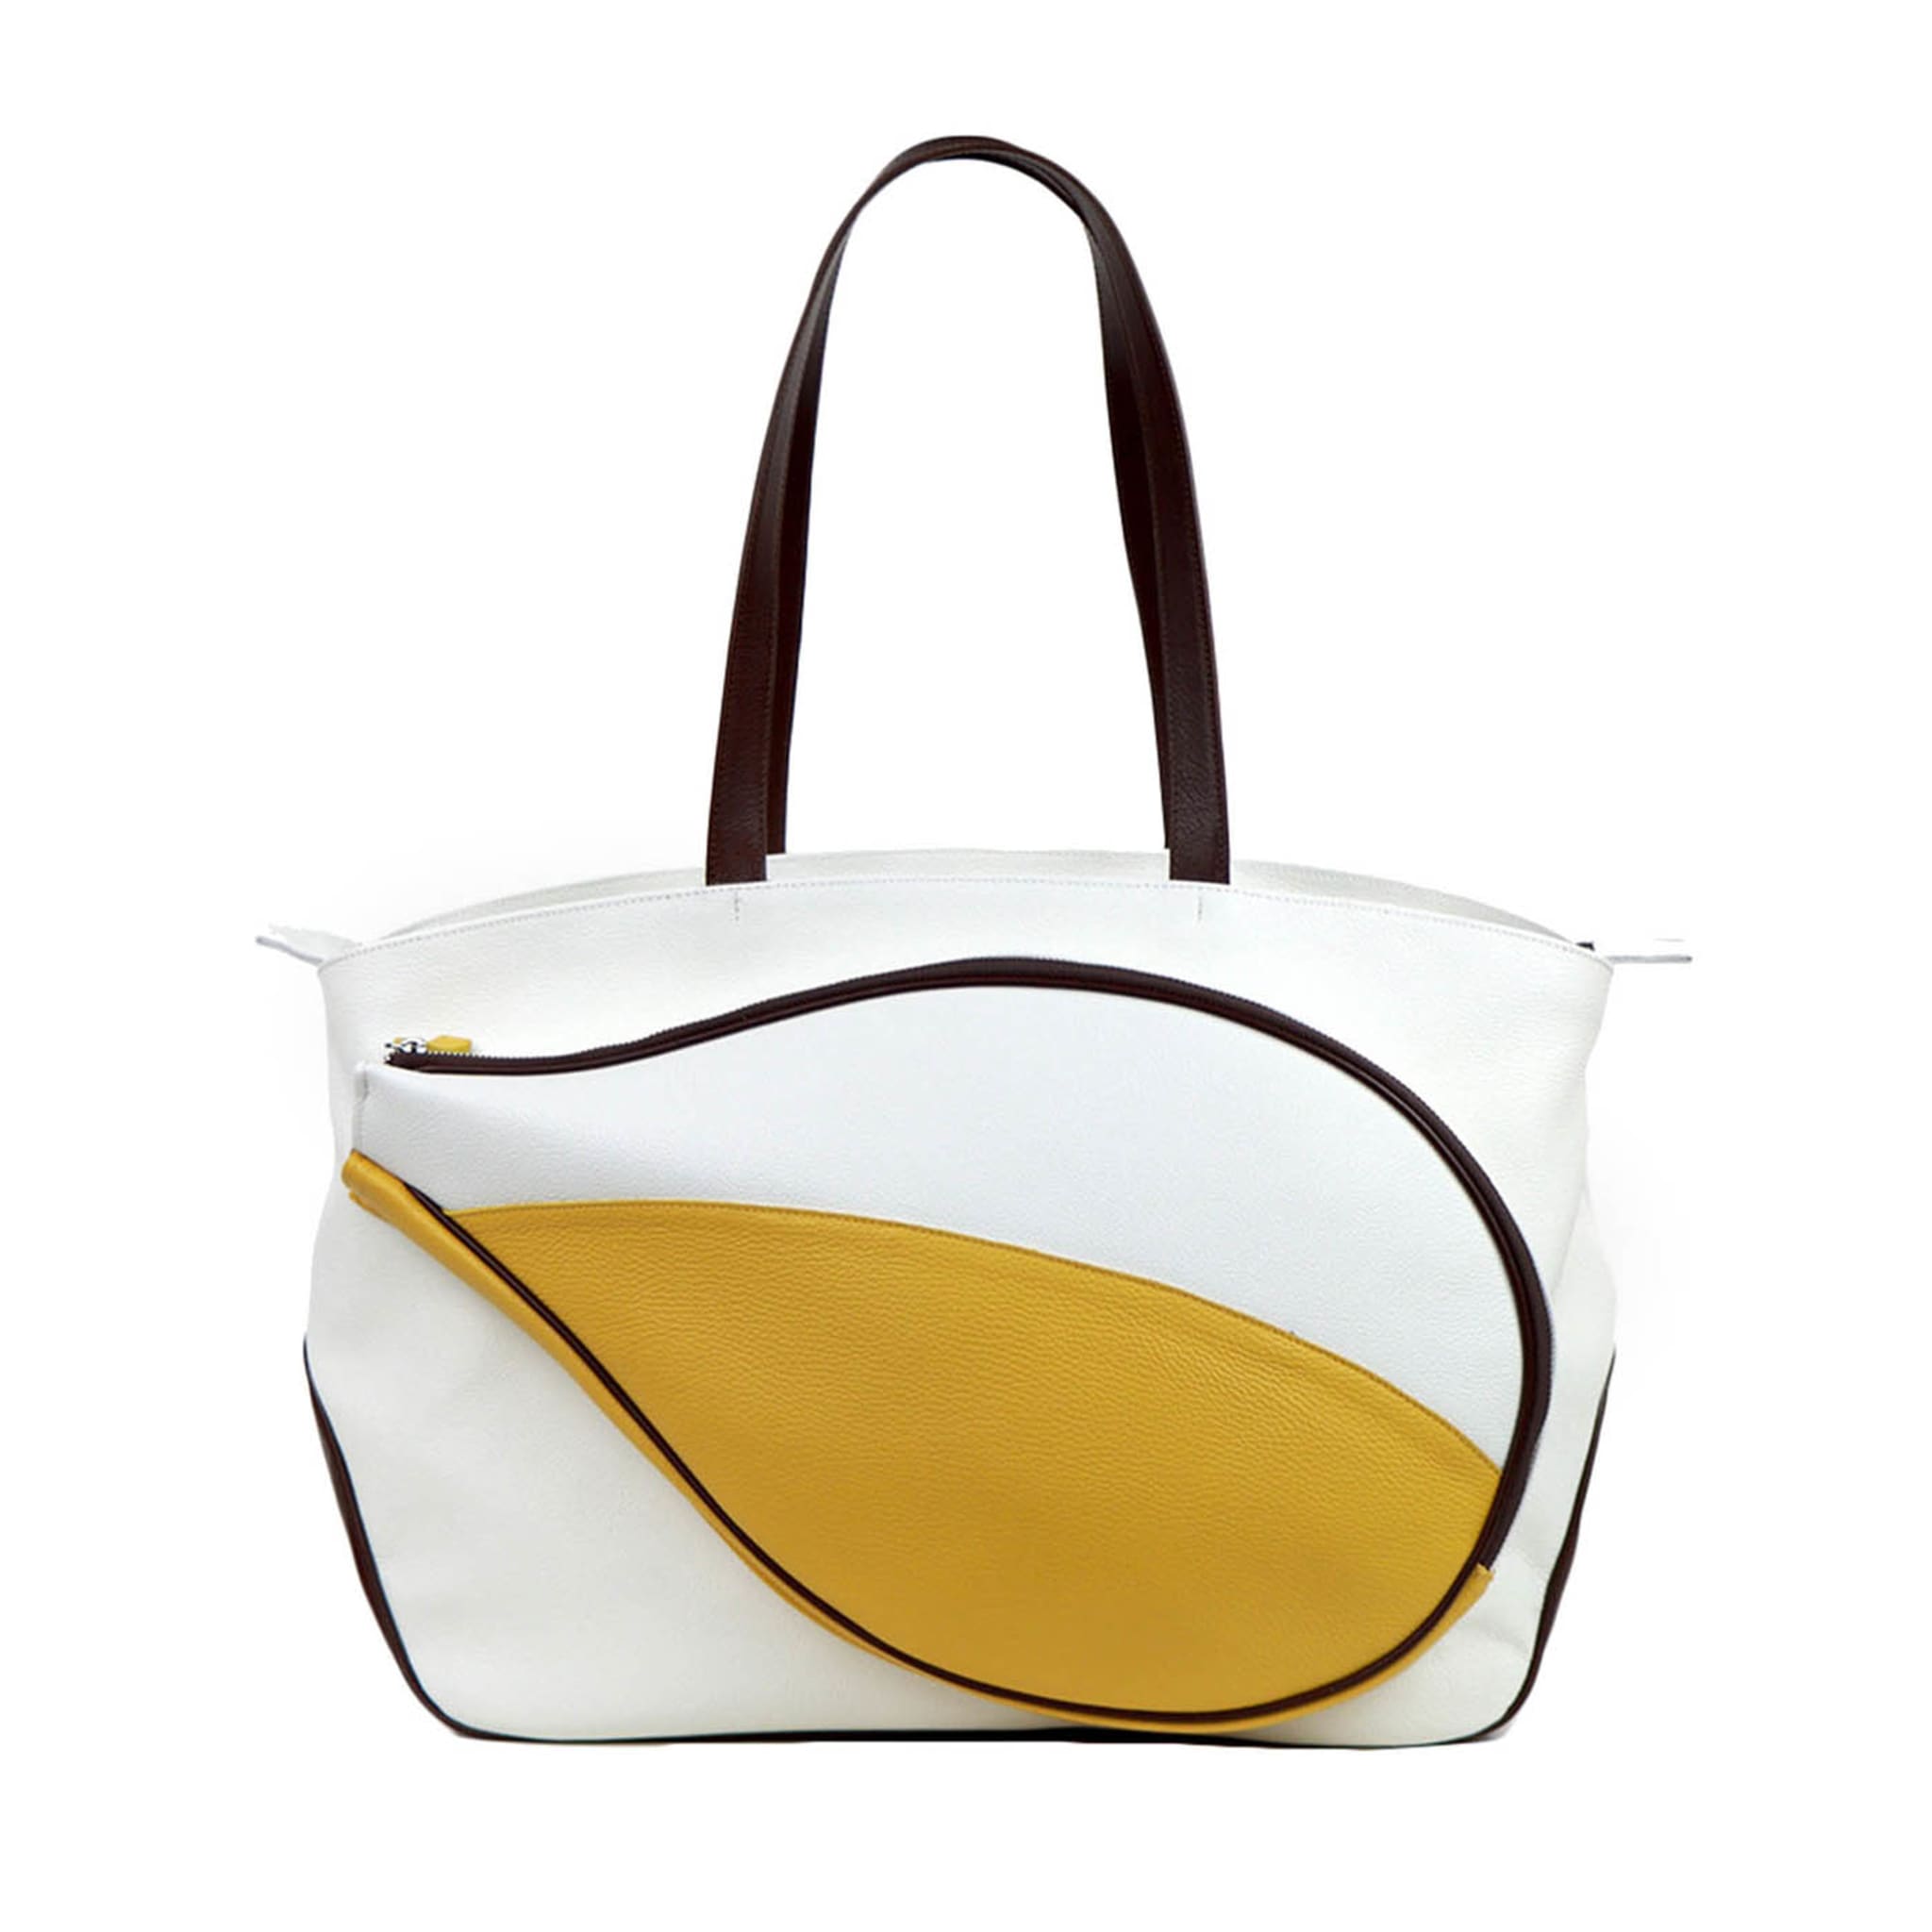 The Perfect Weekend Bags For Women On The Go - Fenzo Italian Bags